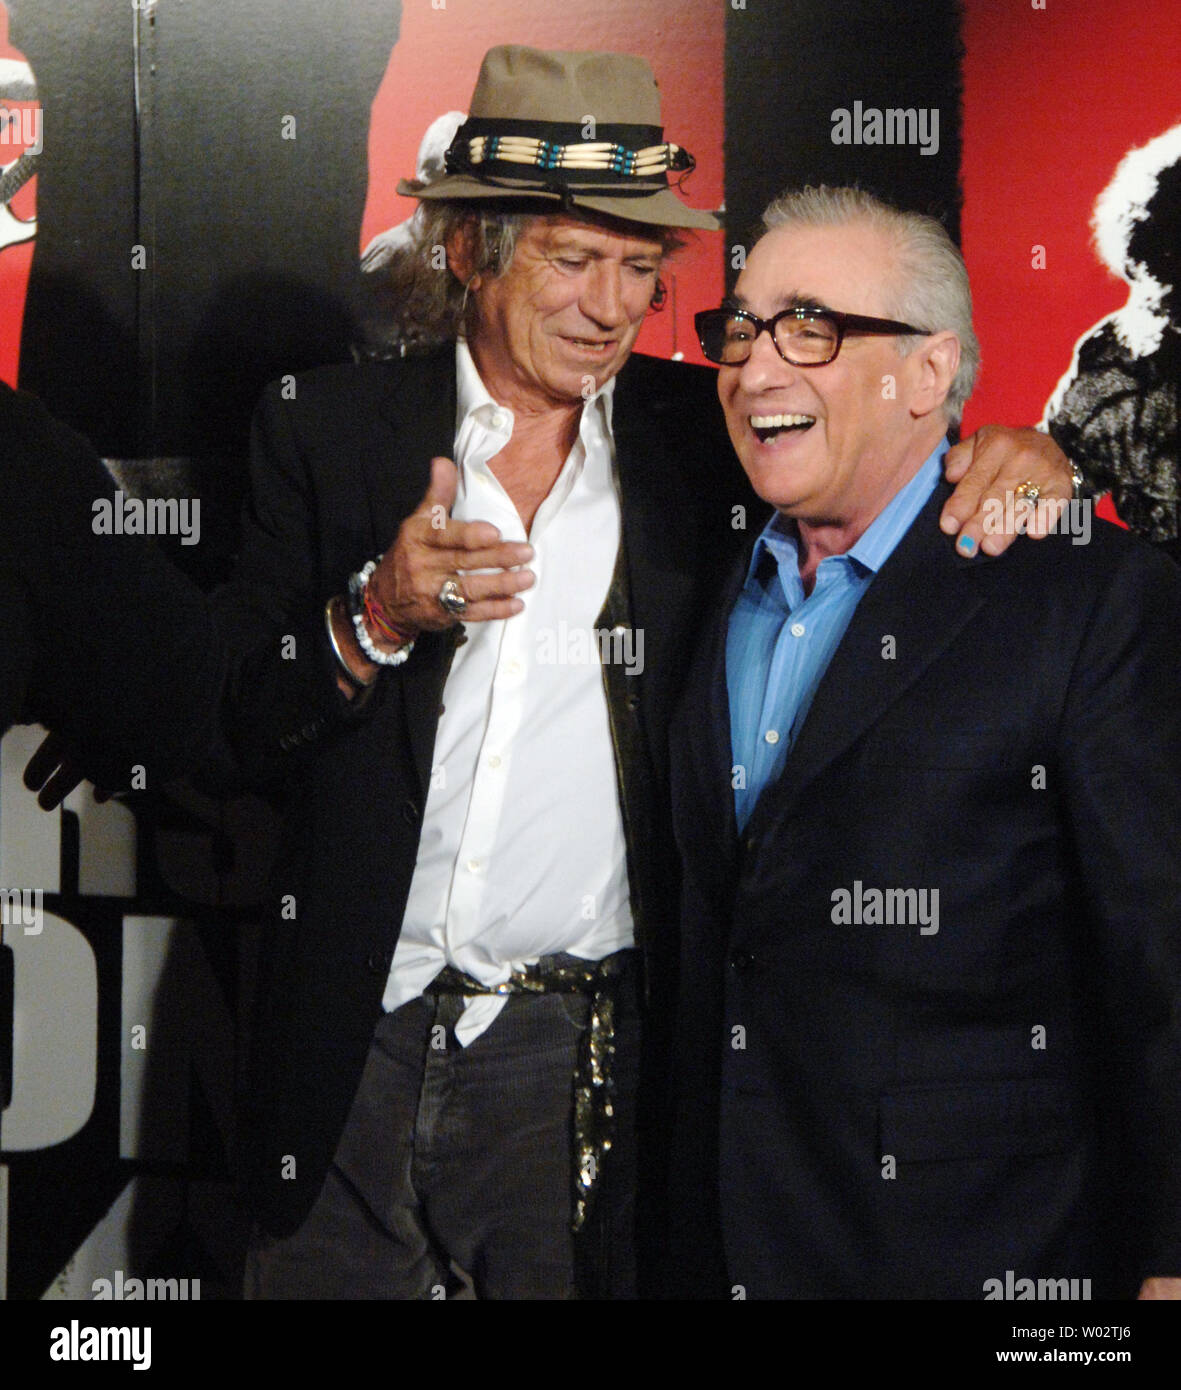 Keith Richards (L) of the Rolling Stones chats with director Martin Scorsese  during a press conference for the Martin Scorsese film documentary on the Rolling  Stones "Shine A Light" on March 30,